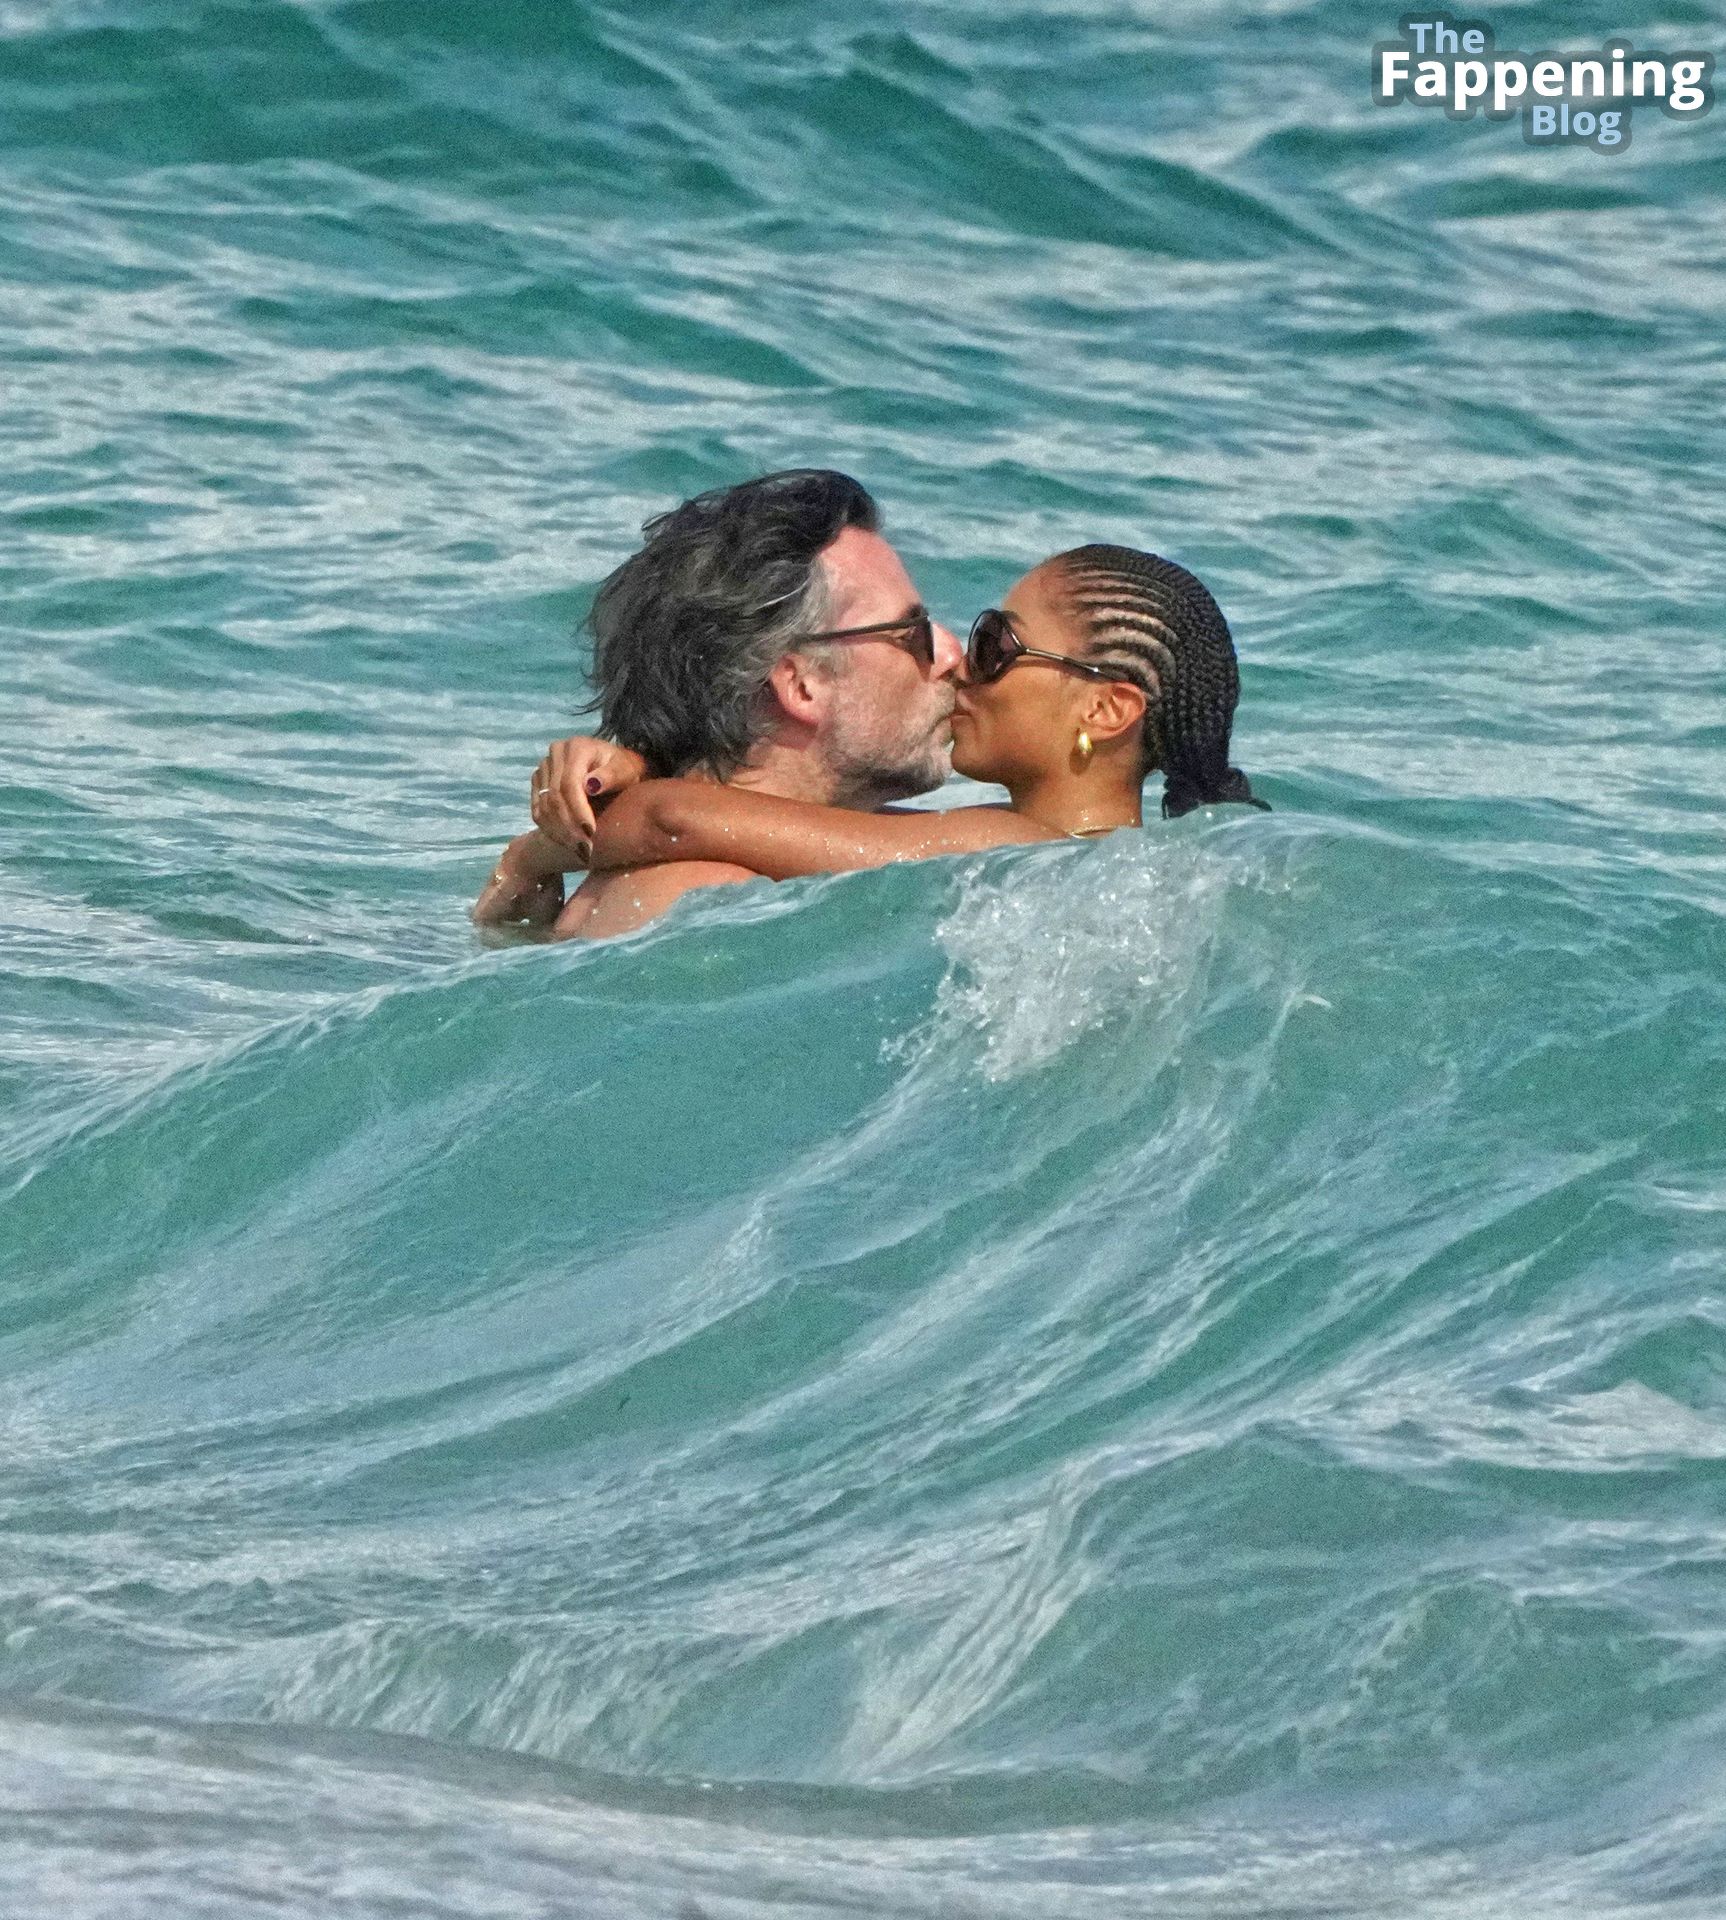 Jacky Krapf &amp; Niclas Castello are Spotted at the Beach in Miami (67 Photos)